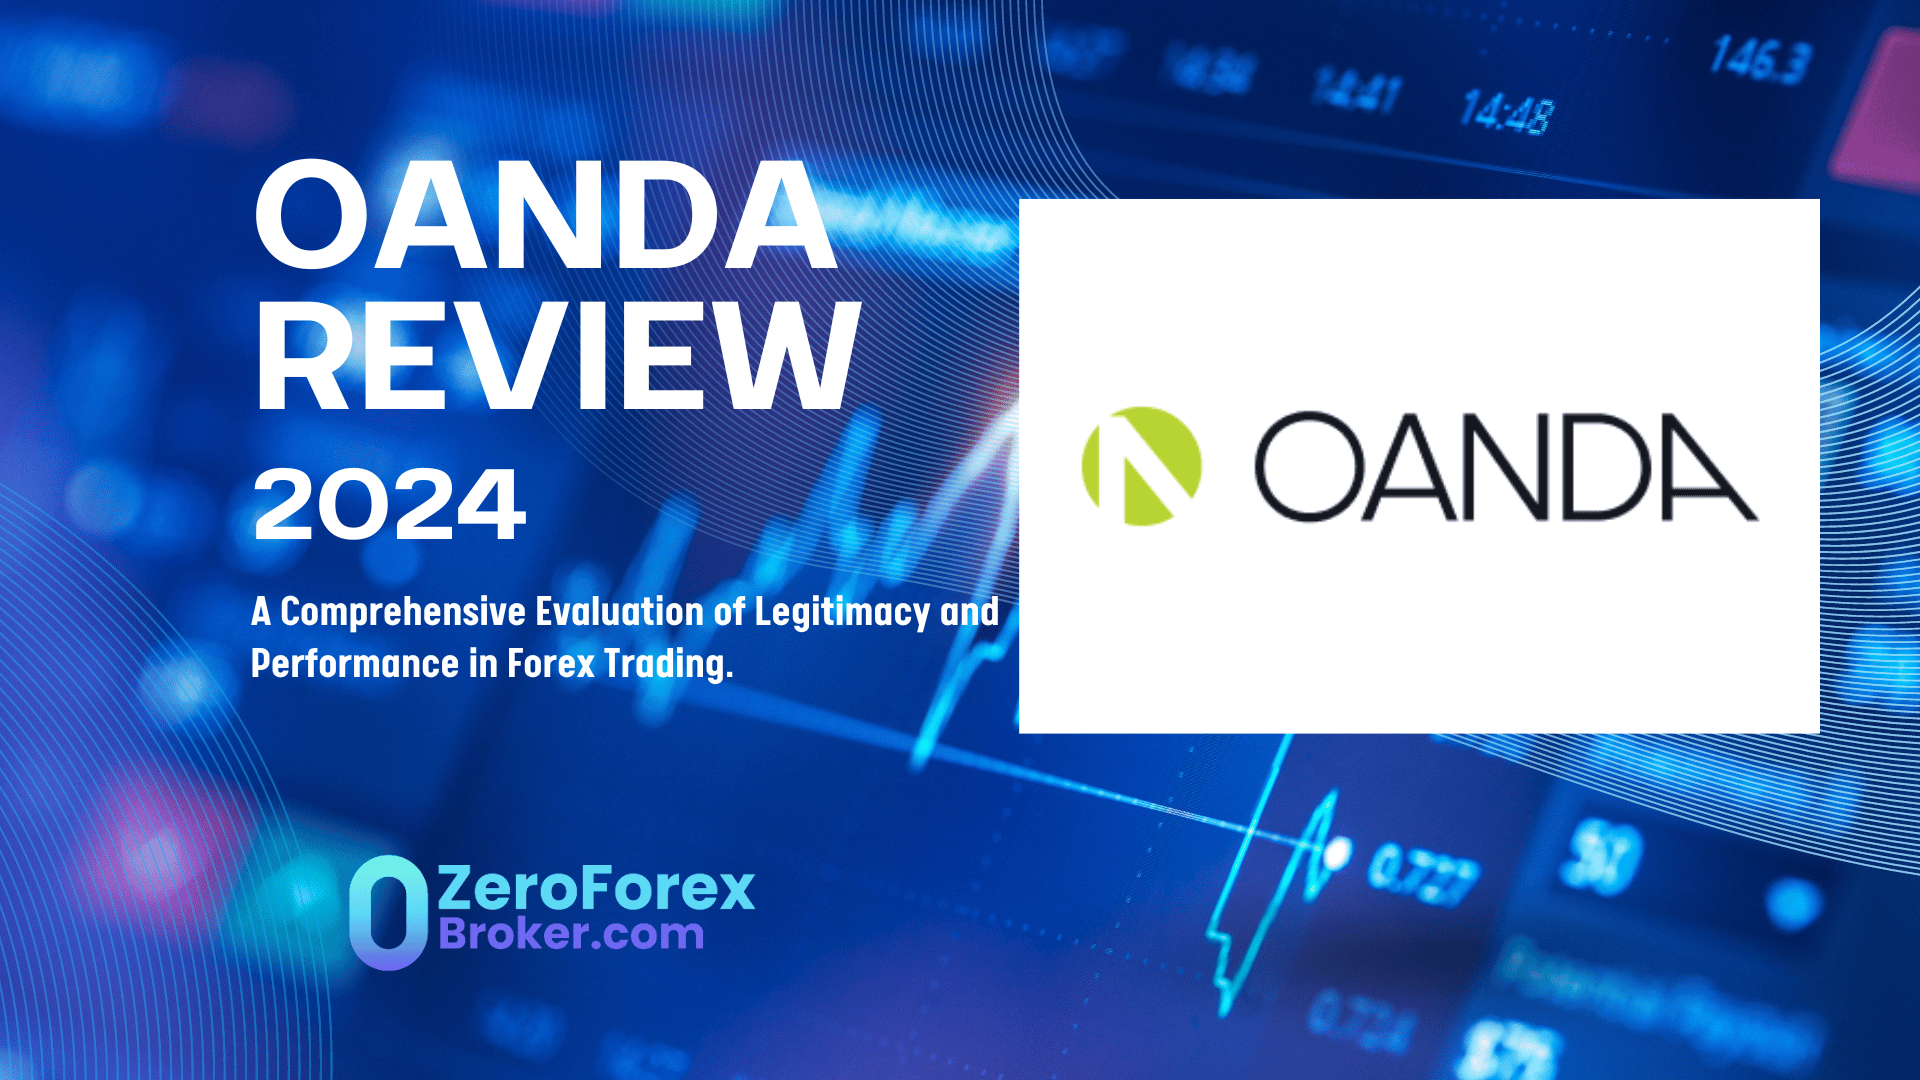 OANDA Review: A Comprehensive Analysis for 2024